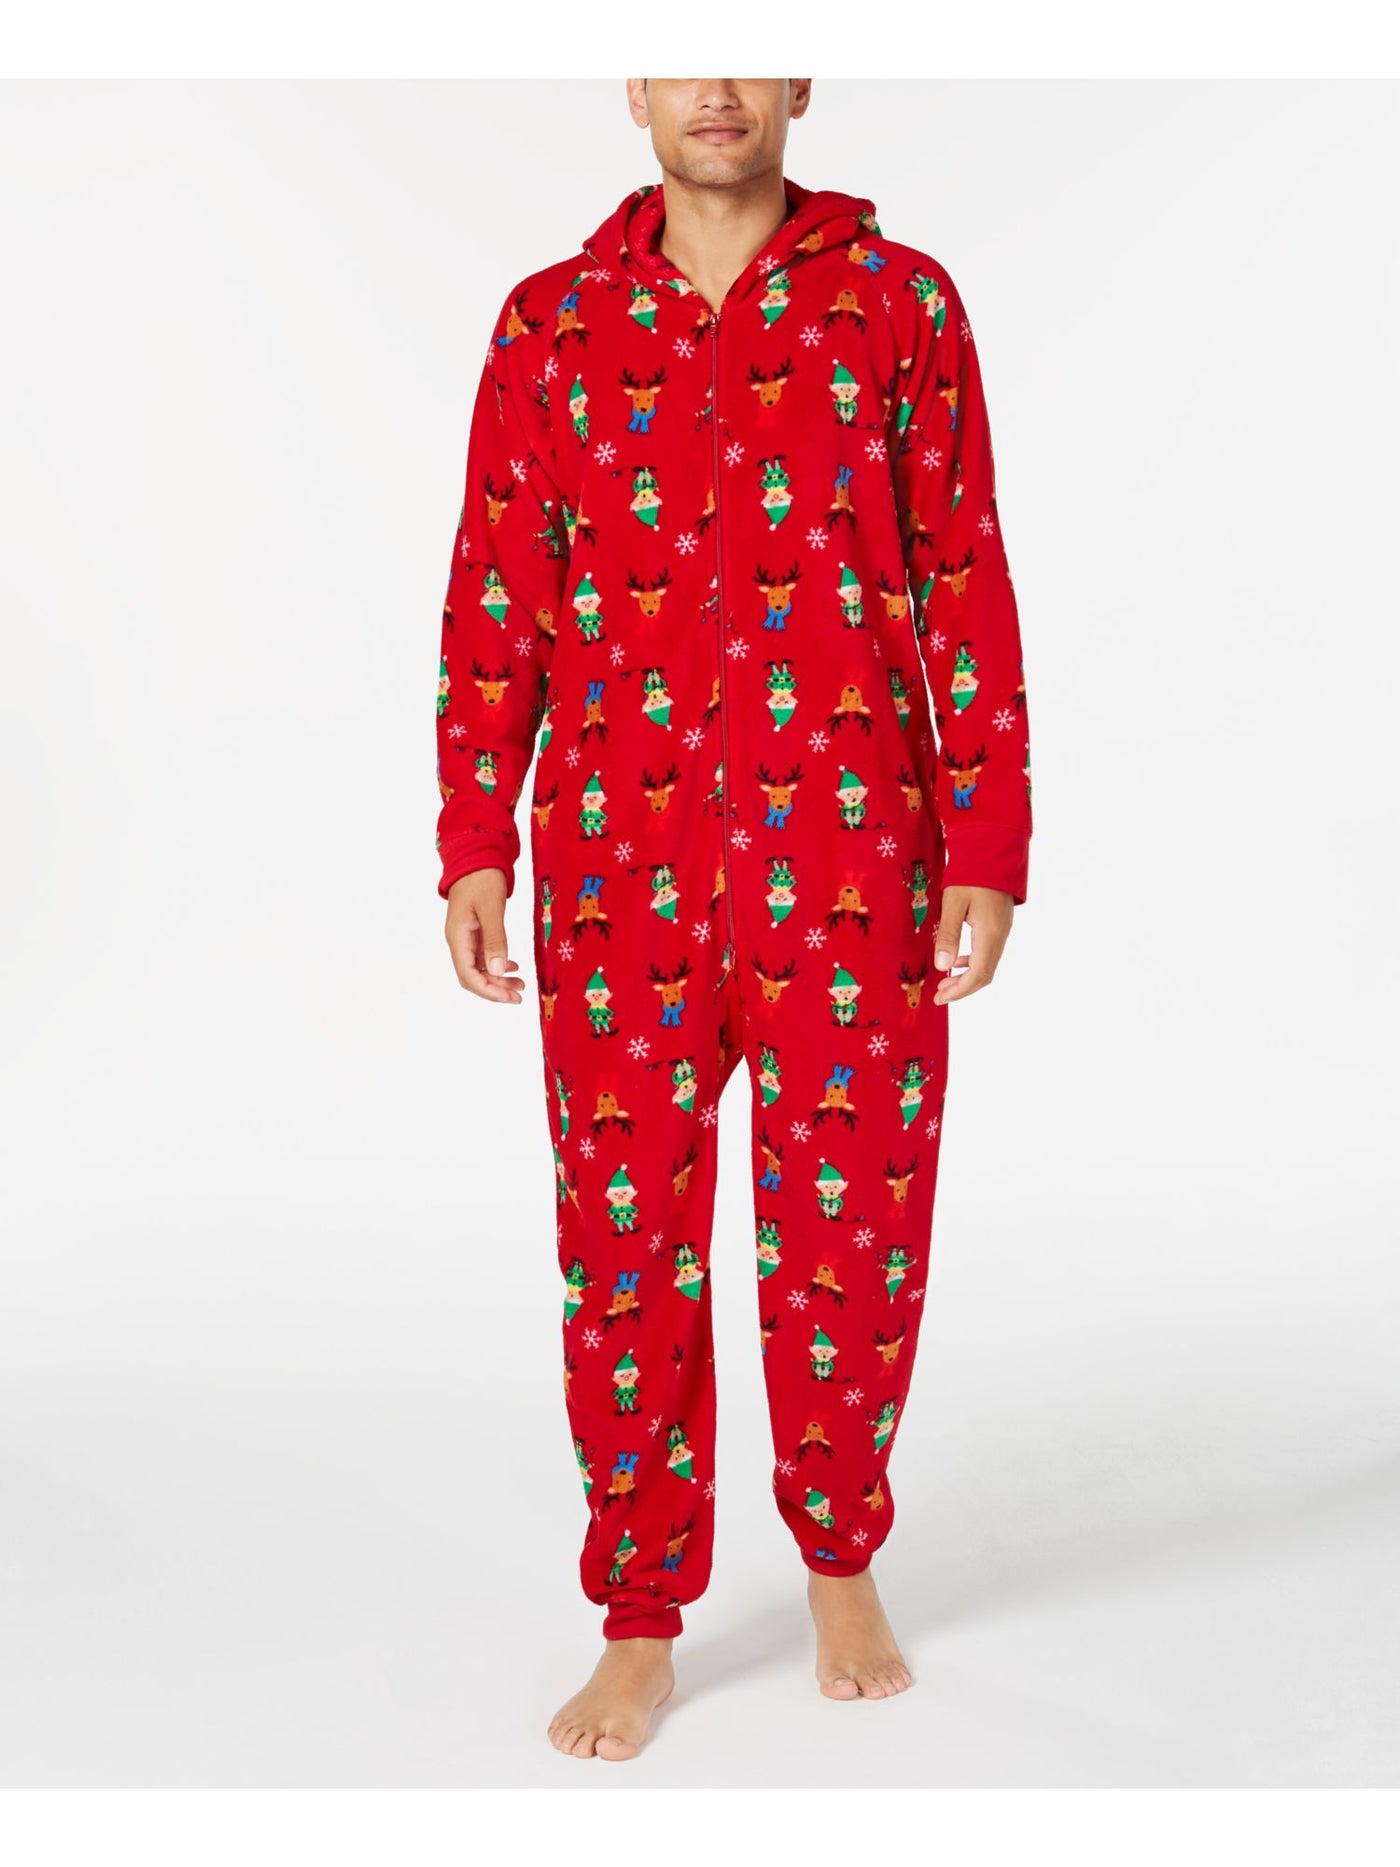 FAMILY PJs Intimates Red Hooded Cuffed Sleeves And Hems Holiday XL